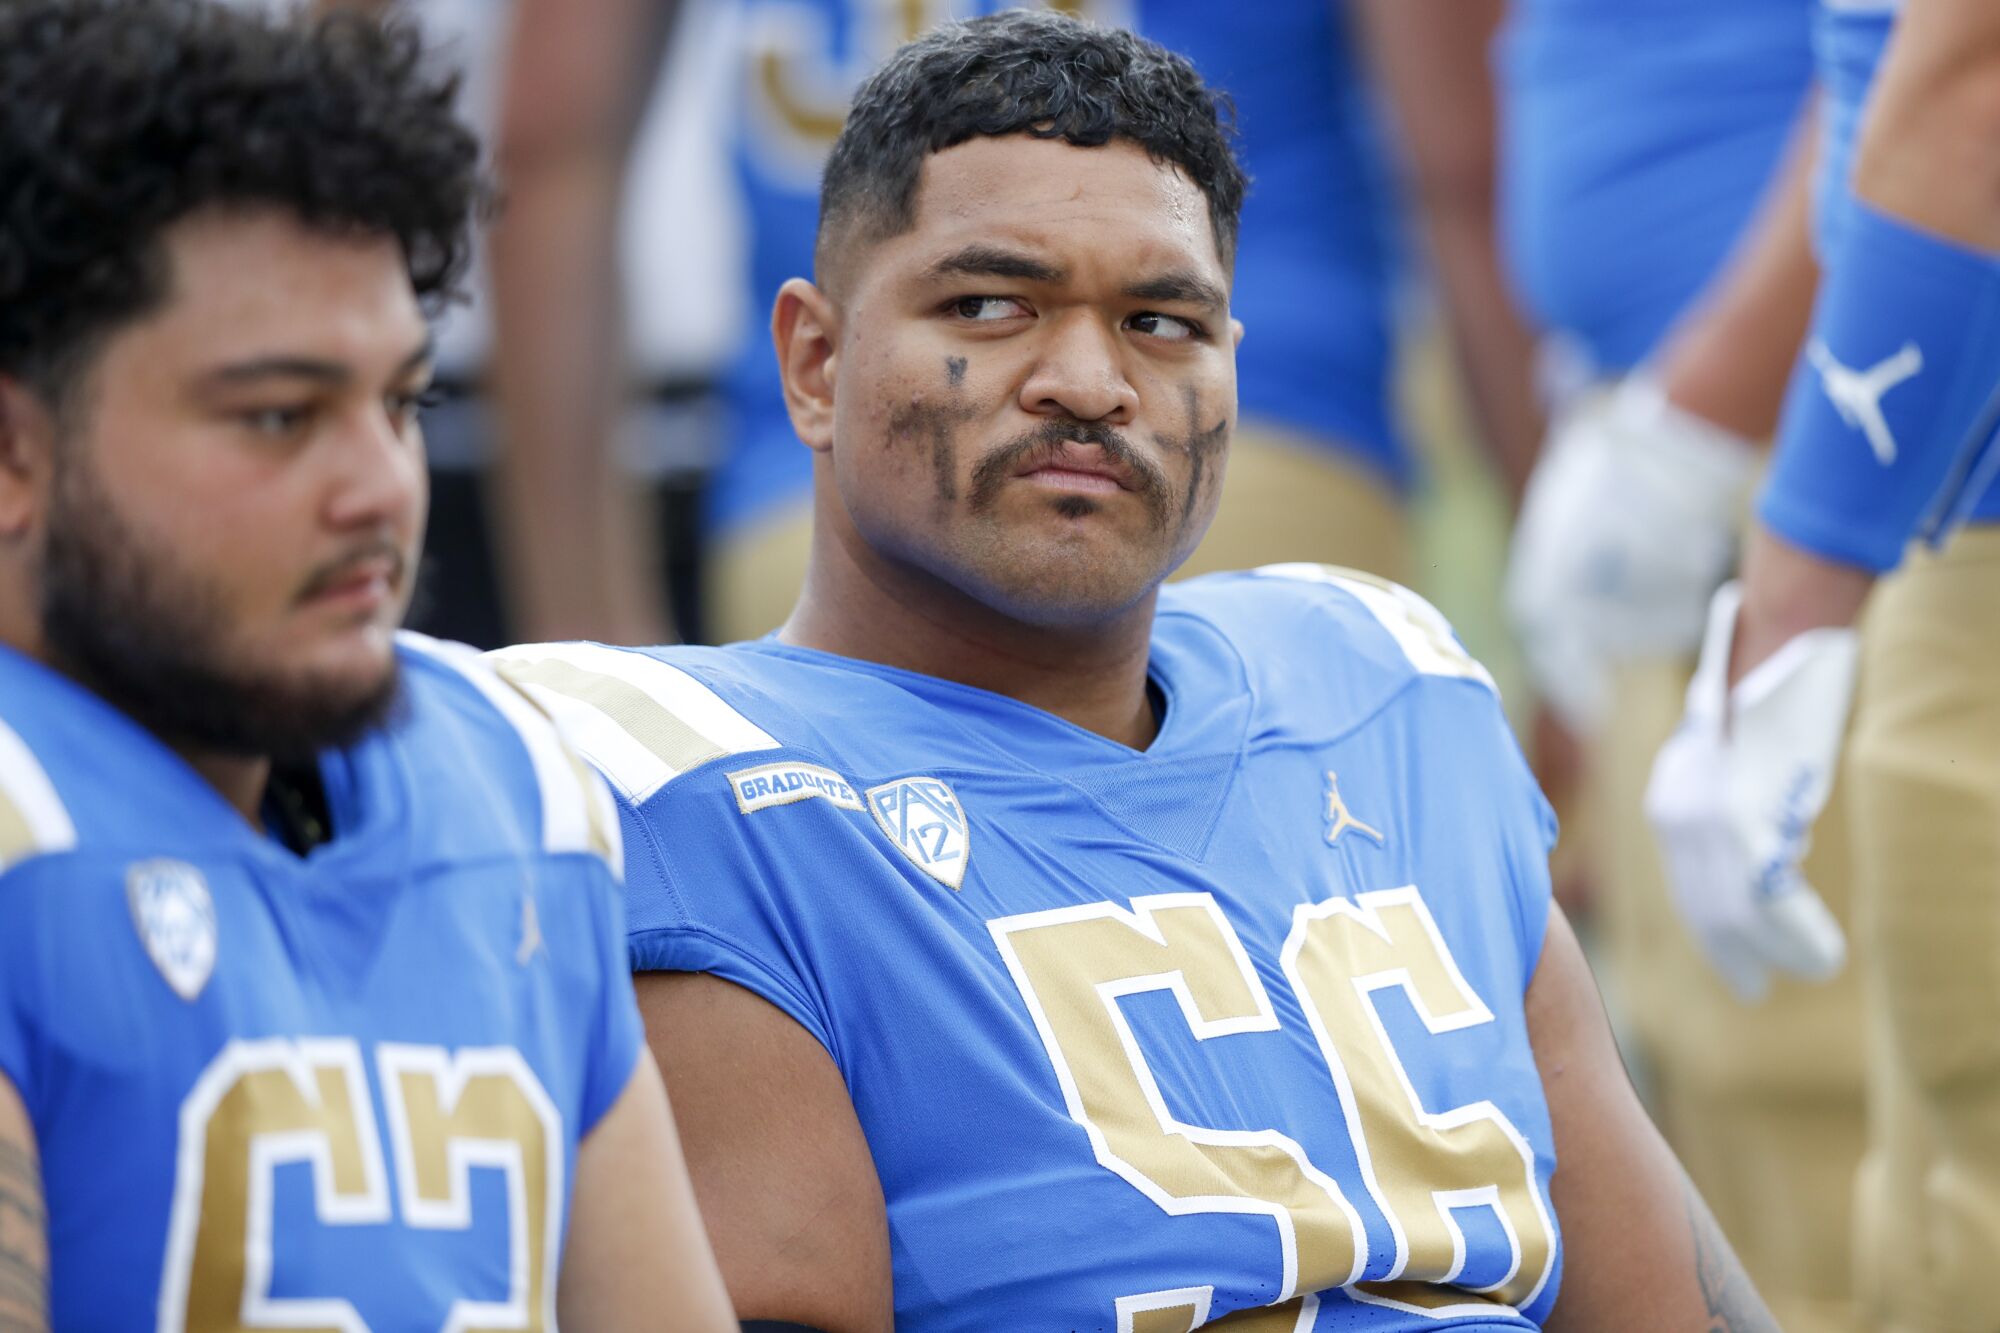 UCLA Bruins offensive lineman Atonio Mafi (56) sits on the bench during a college football game